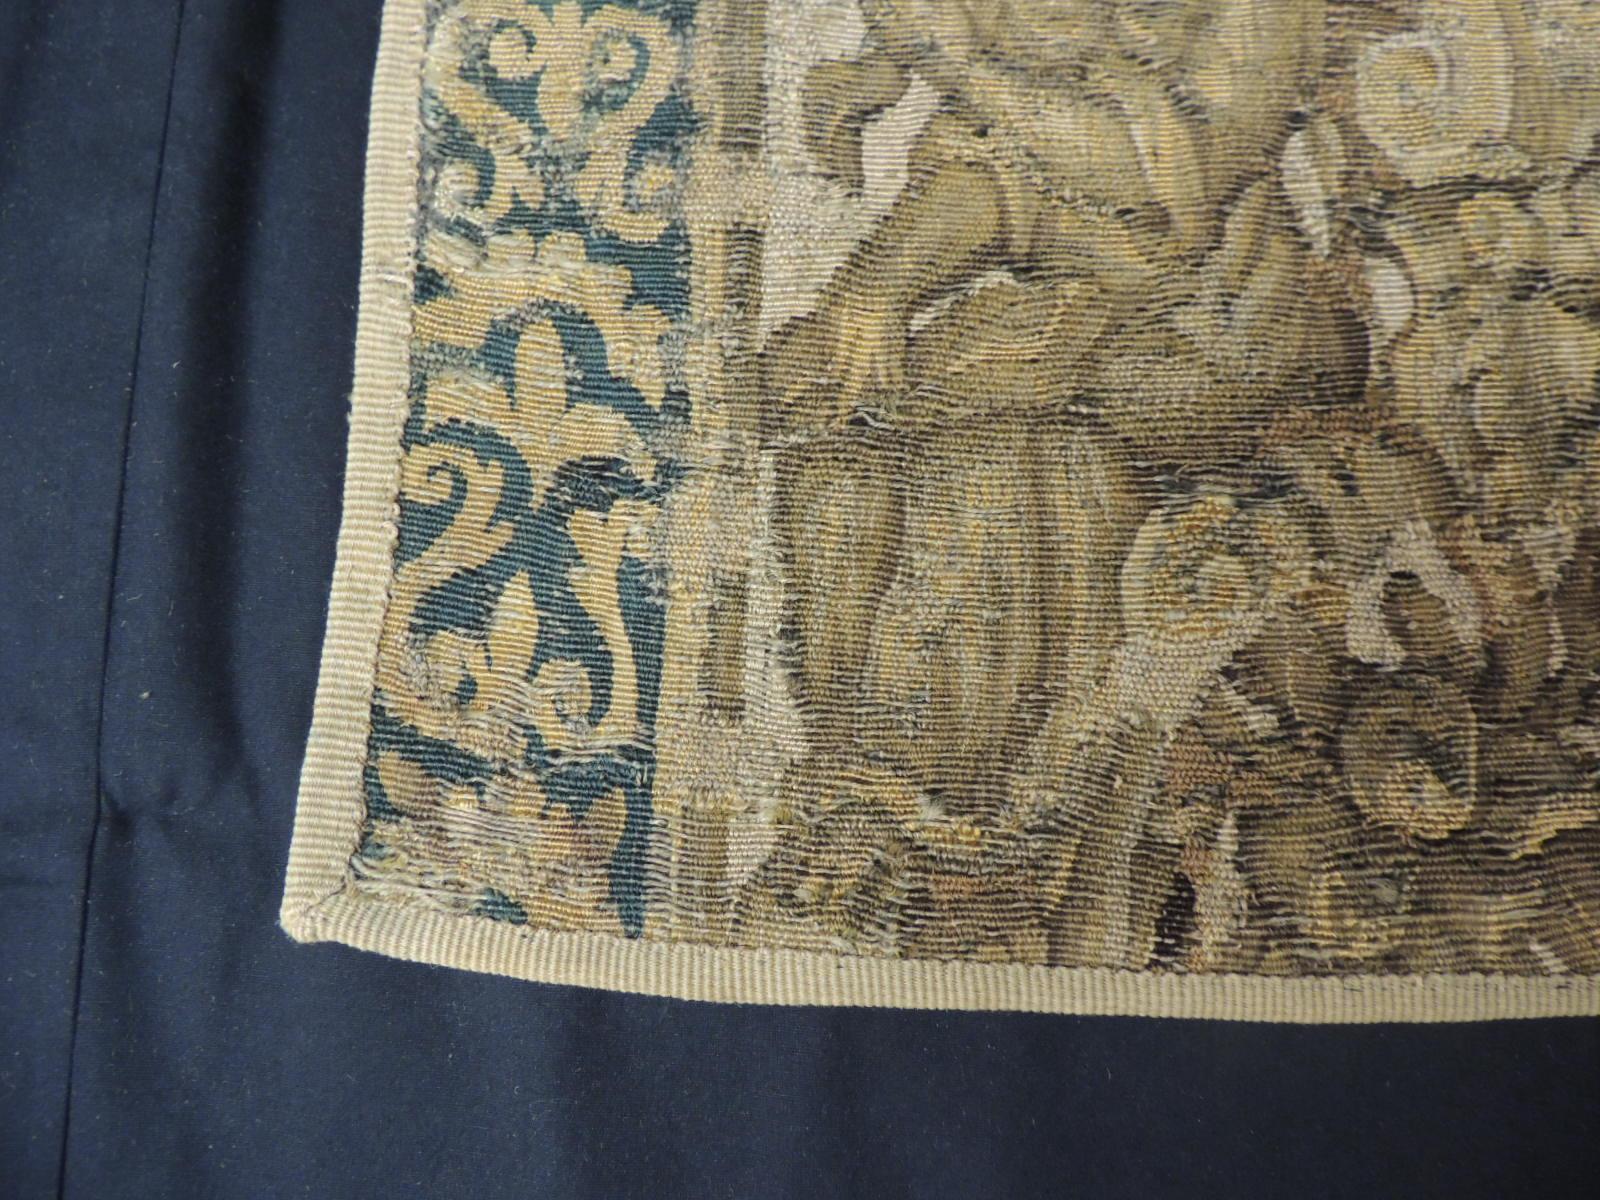 19th century green and gold verdure tapestry fragment, depicting an angel face, two harp playing ladies, a lion face, birds, fruits and an urn.
Framed with small french ribbon all around and backed with linen.
